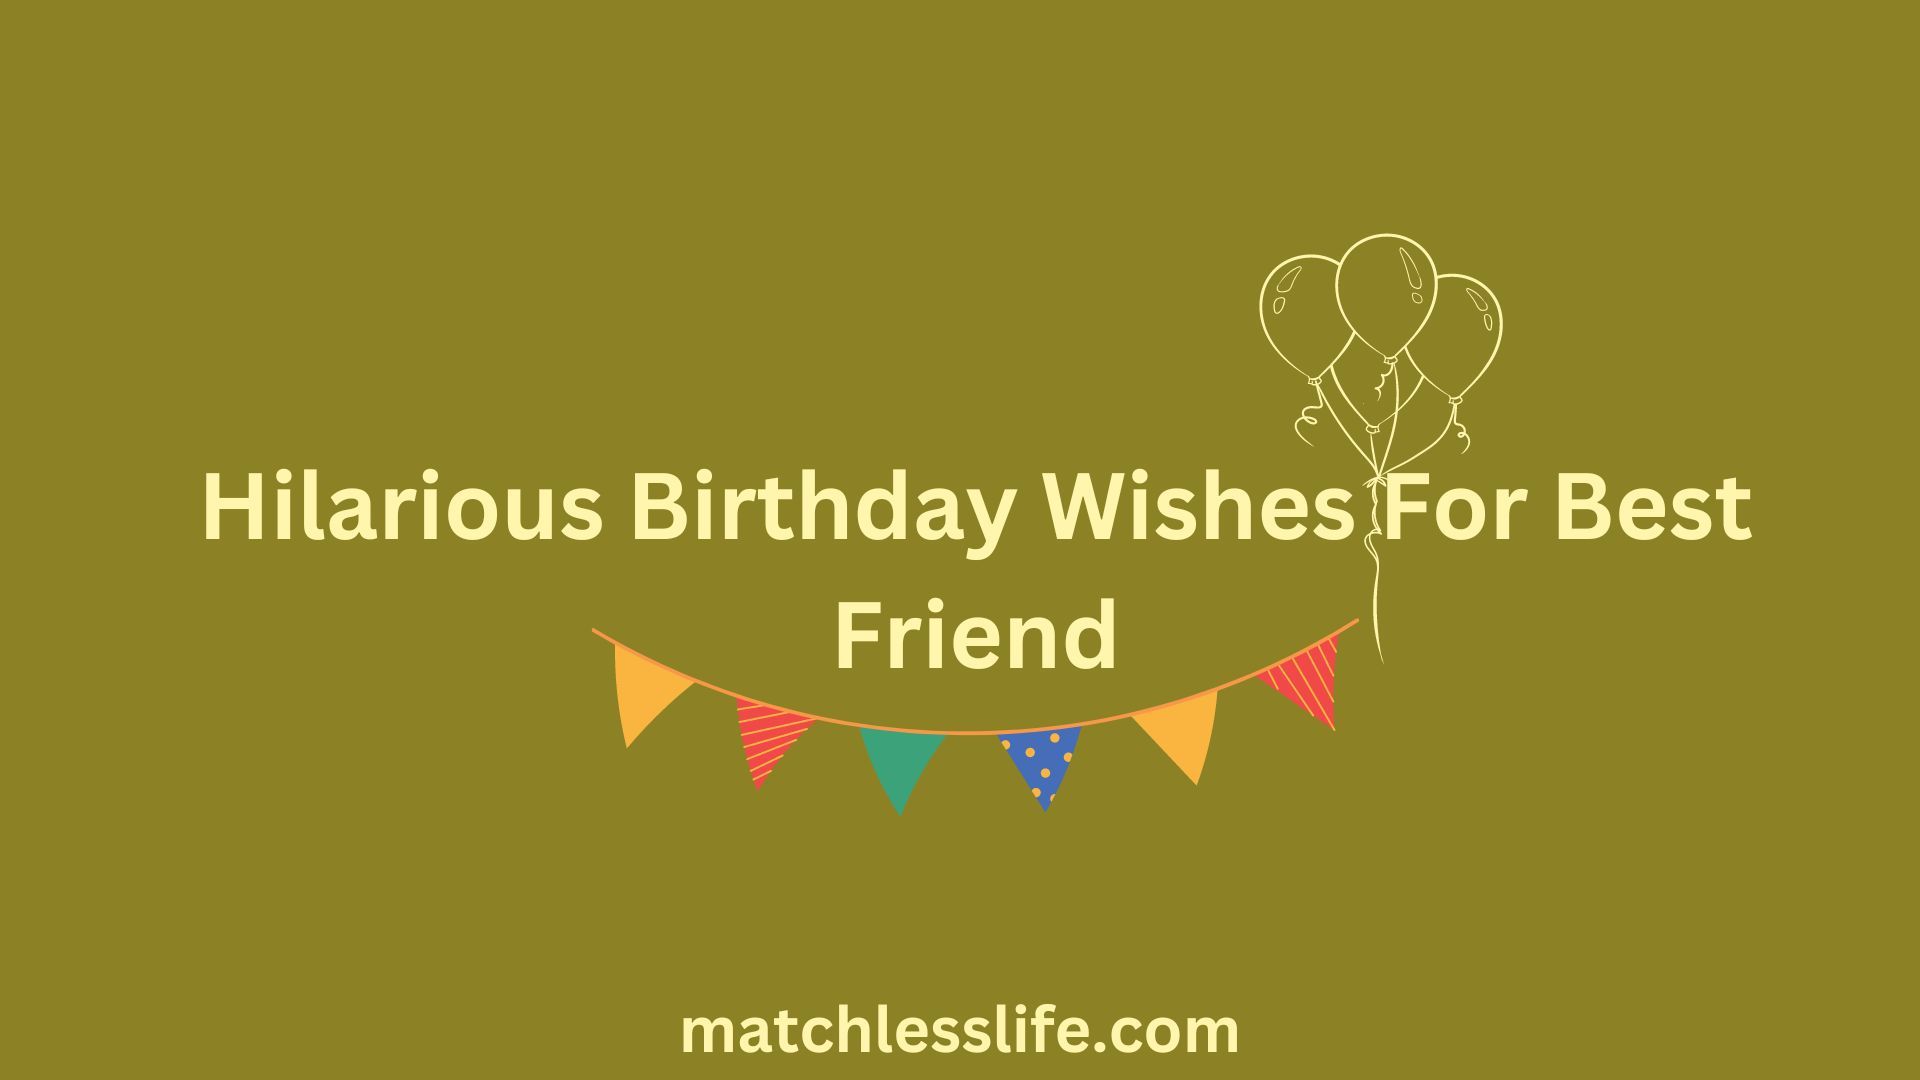 Hilarious Birthday Wishes For Best Friend